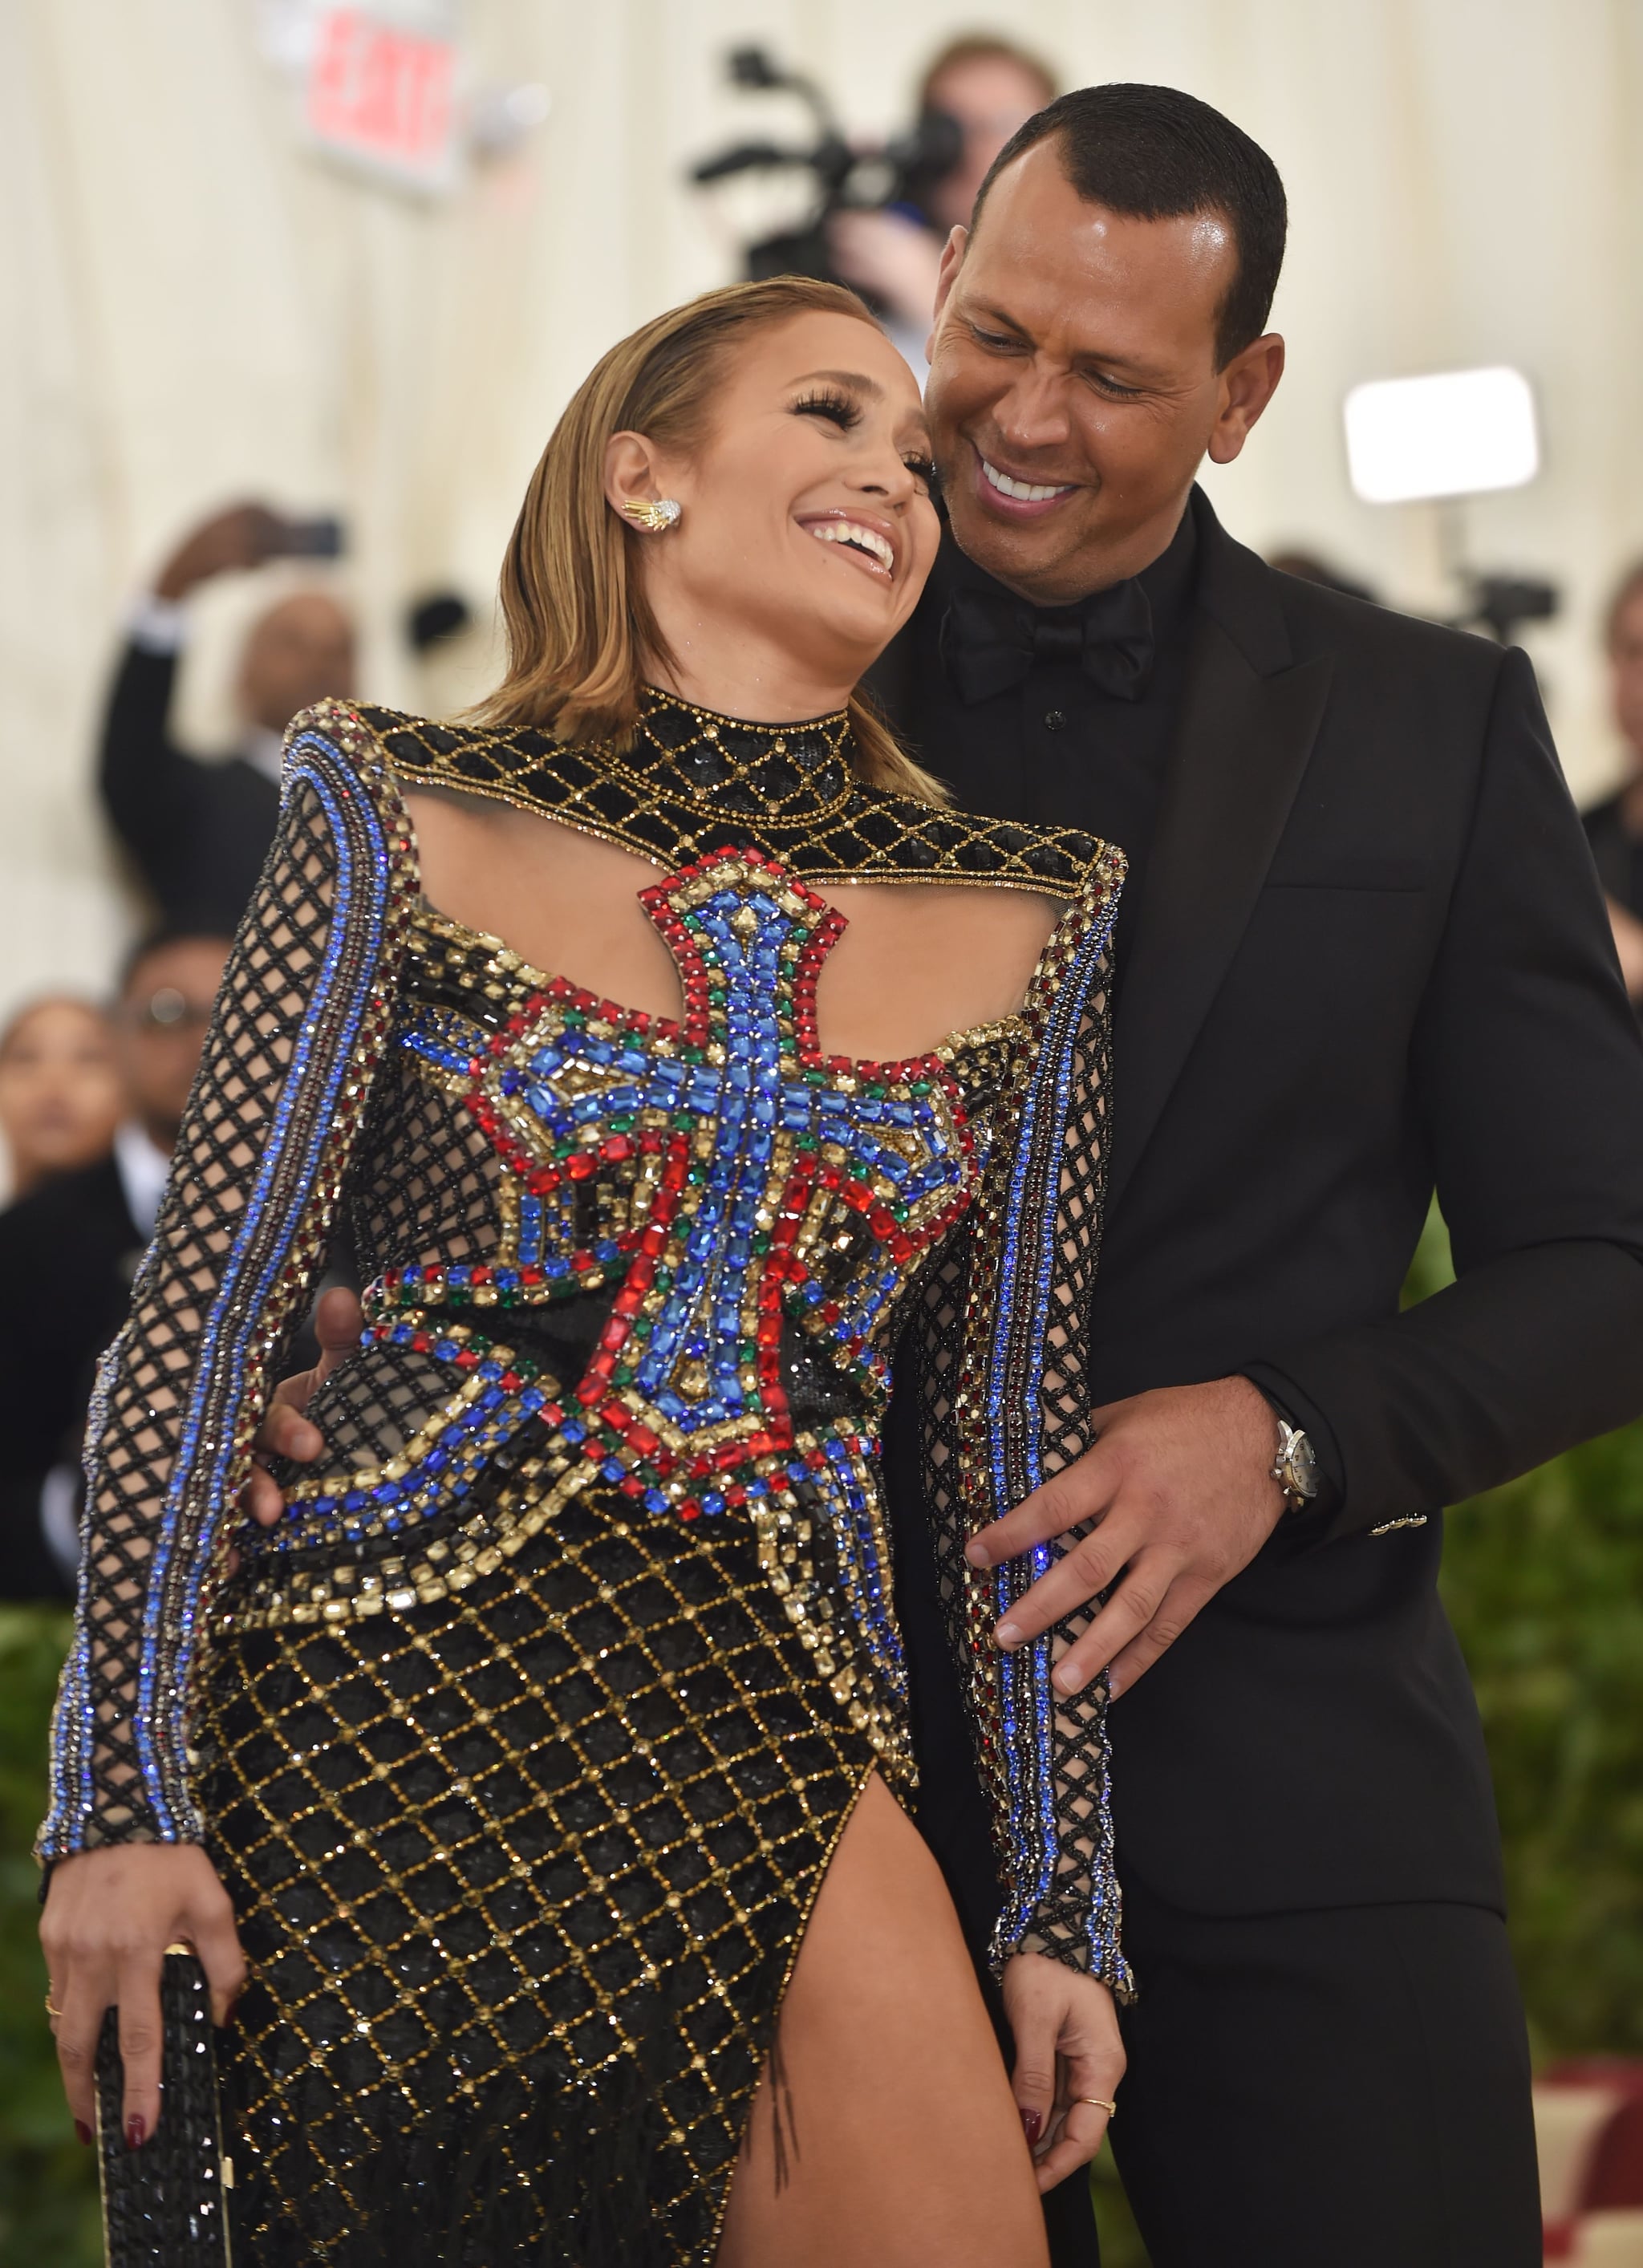 TOPSHOT - Jennifer Lopez and Alex Rodriguez arrive for the 2018 Met Gala on May 7, 2018, at the Metropolitan Museum of Art in New York. - The Gala raises money for the Metropolitan Museum of Arts Costume Institute. The Gala's 2018 theme is Heavenly Bodies: Fashion and the Catholic Imagination. (Photo by Hector RETAMAL / AFP)        (Photo credit should read HECTOR RETAMAL/AFP/Getty Images)